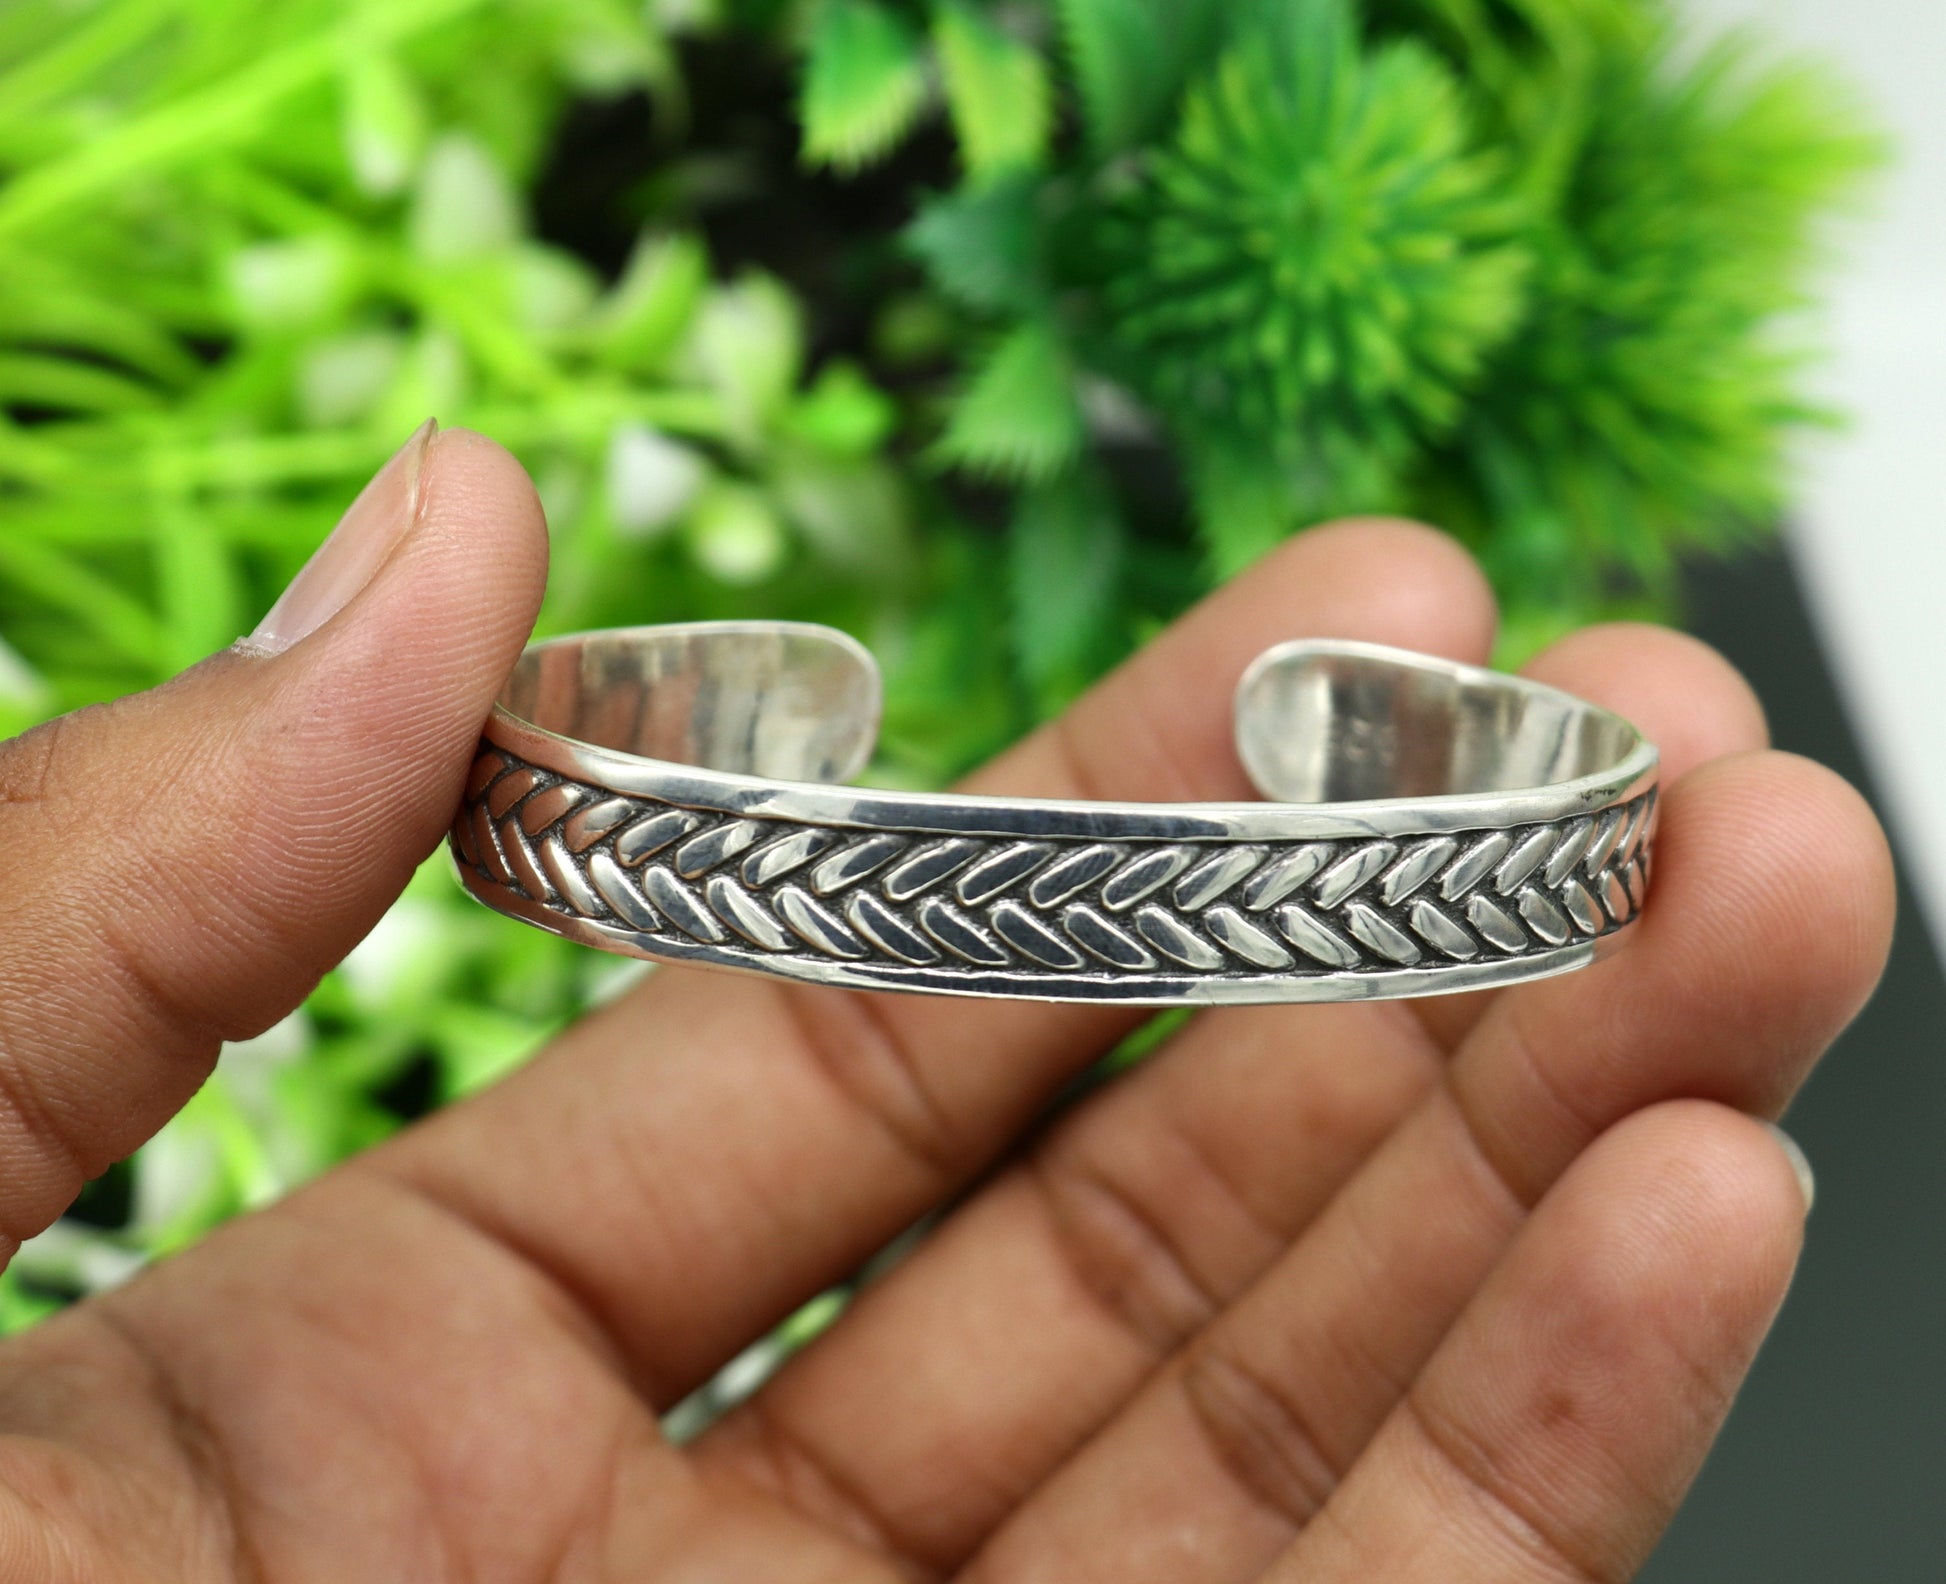 Authentic 925 sterling silver exclusive handmade Tiger design cuff kada bracelet, easy to adjust with your wrist, unisex jewelry cuff44 - TRIBAL ORNAMENTS